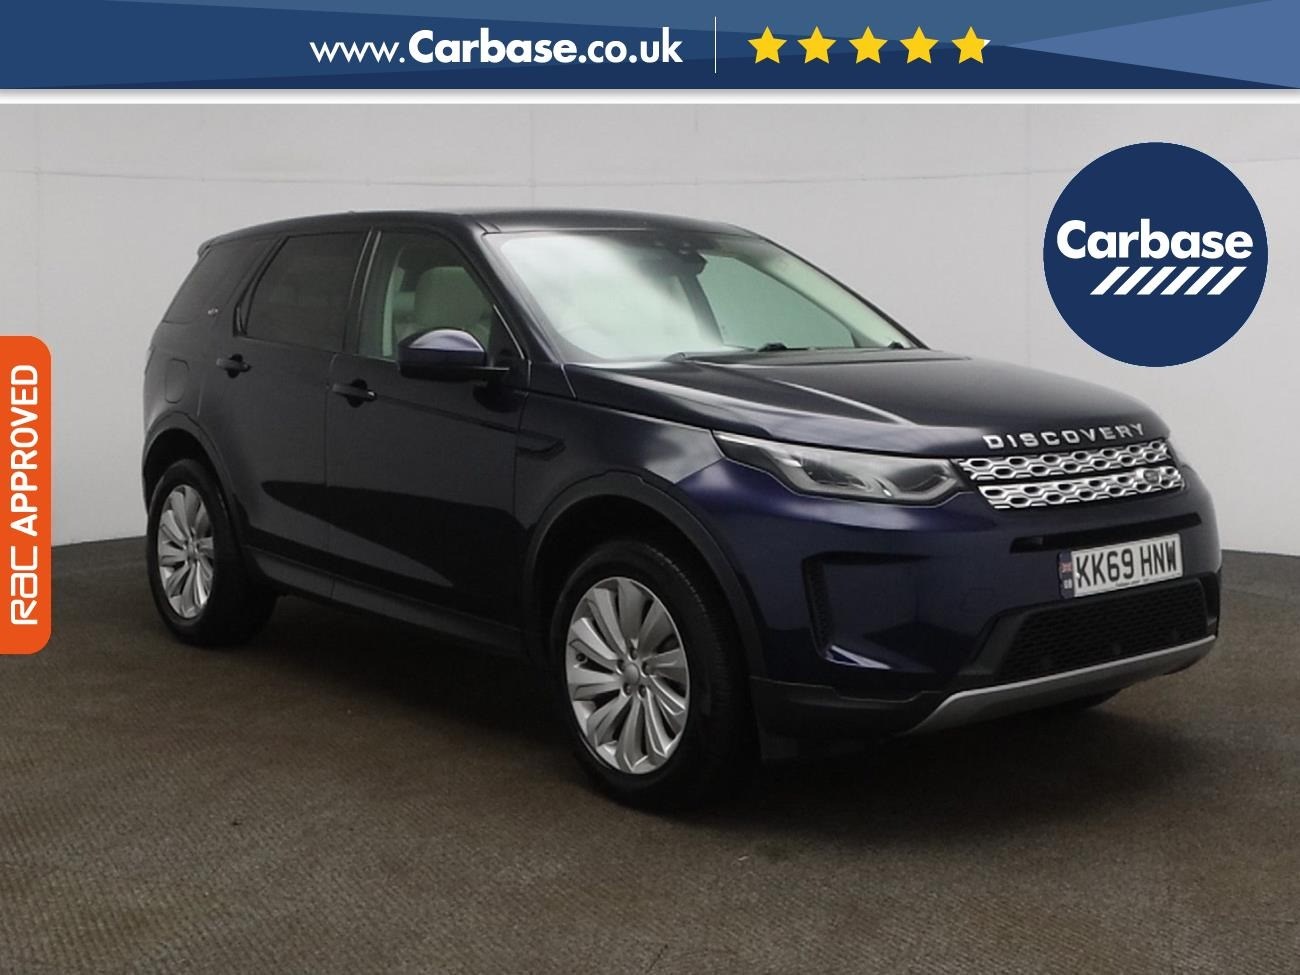 Used Land Rover Discovery Sport For Sale - Carbase